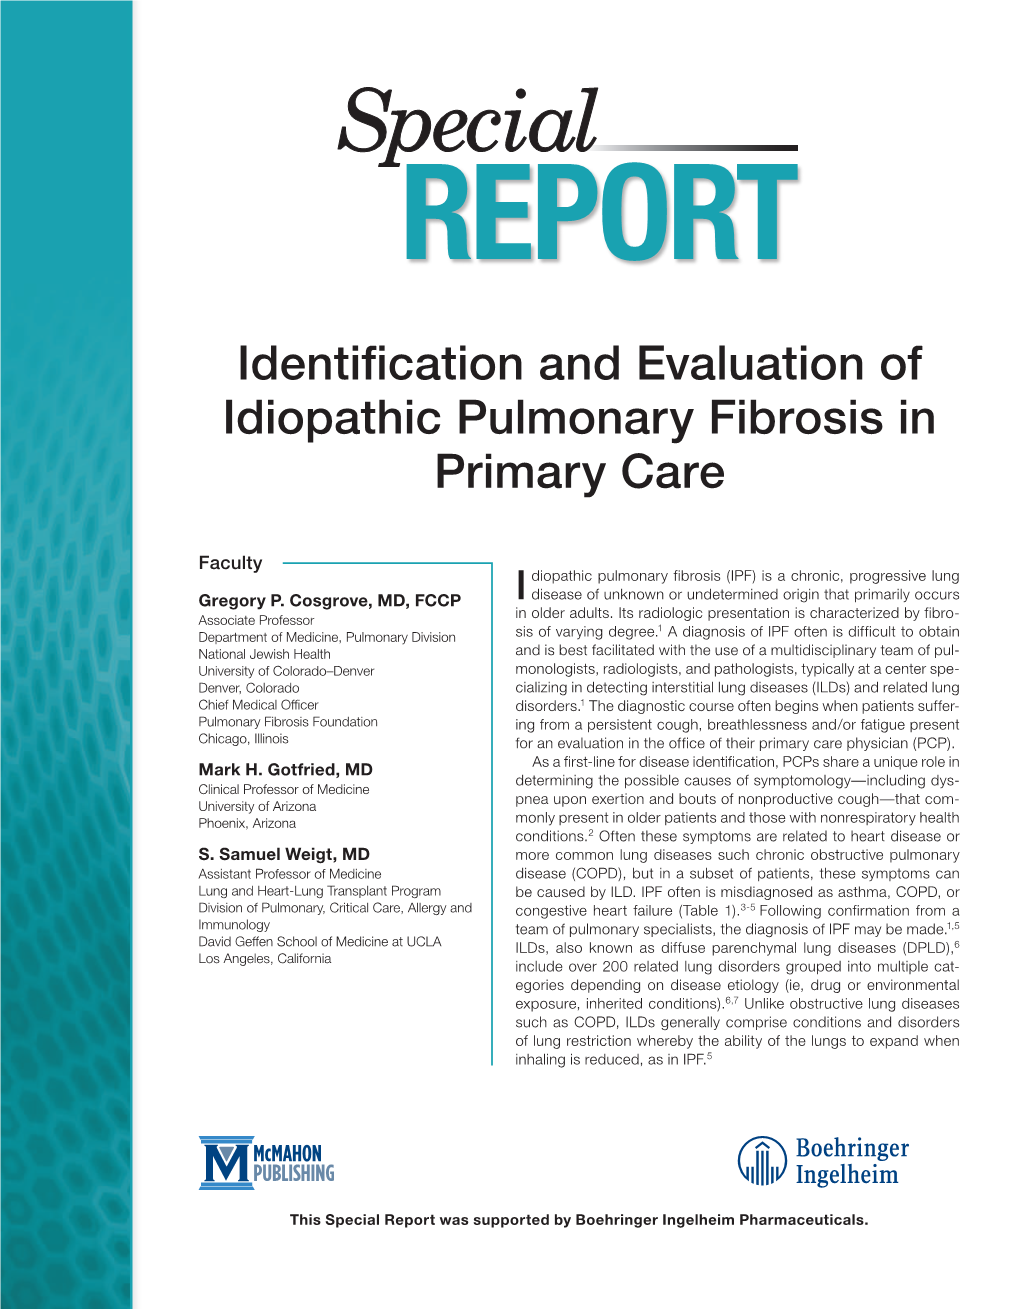 Identification and Evaluation of Idiopathic Pulmonary Fibrosis in Primary Care